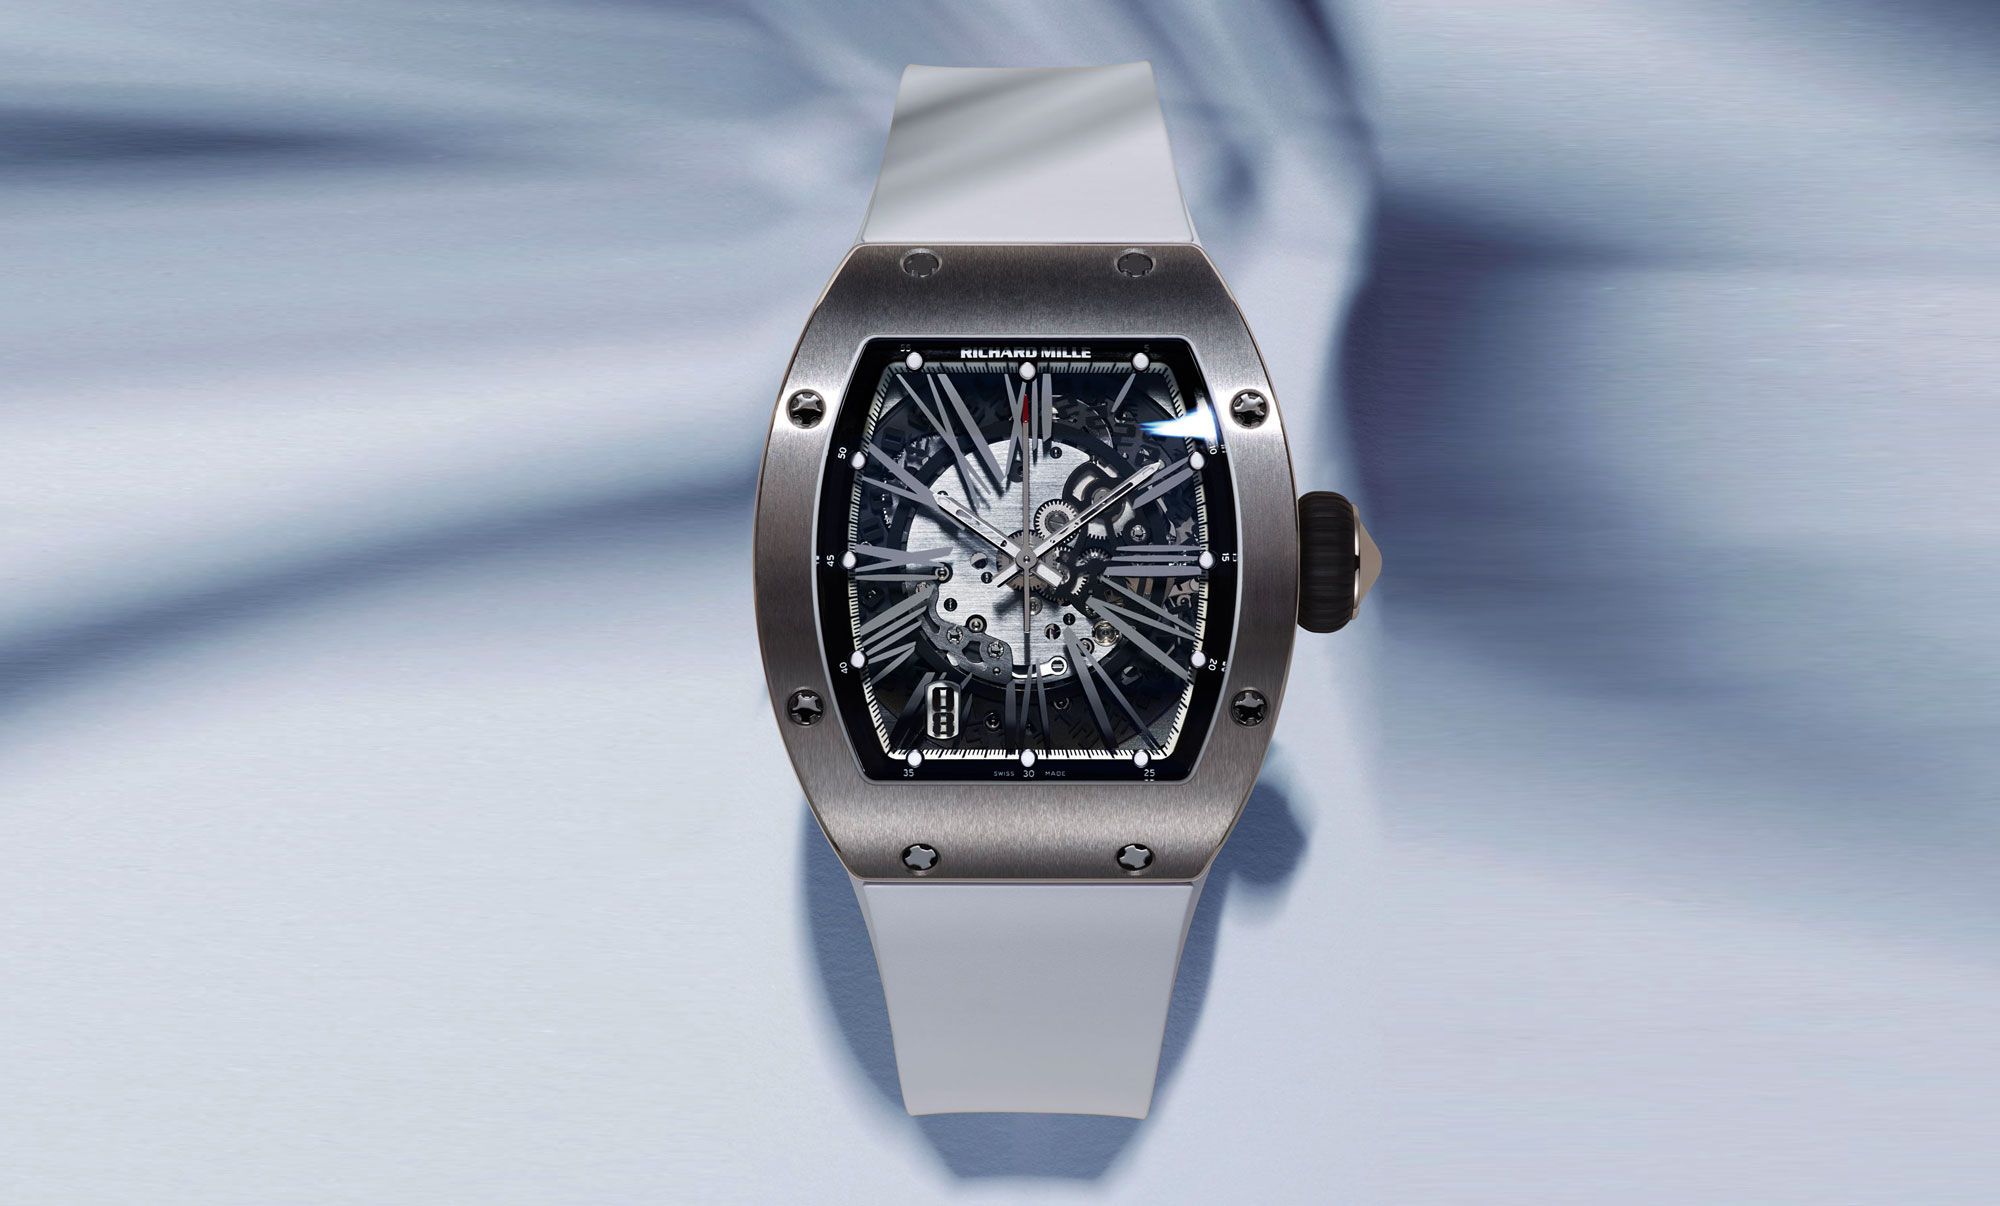 Richard Mille RM 023 replica watches